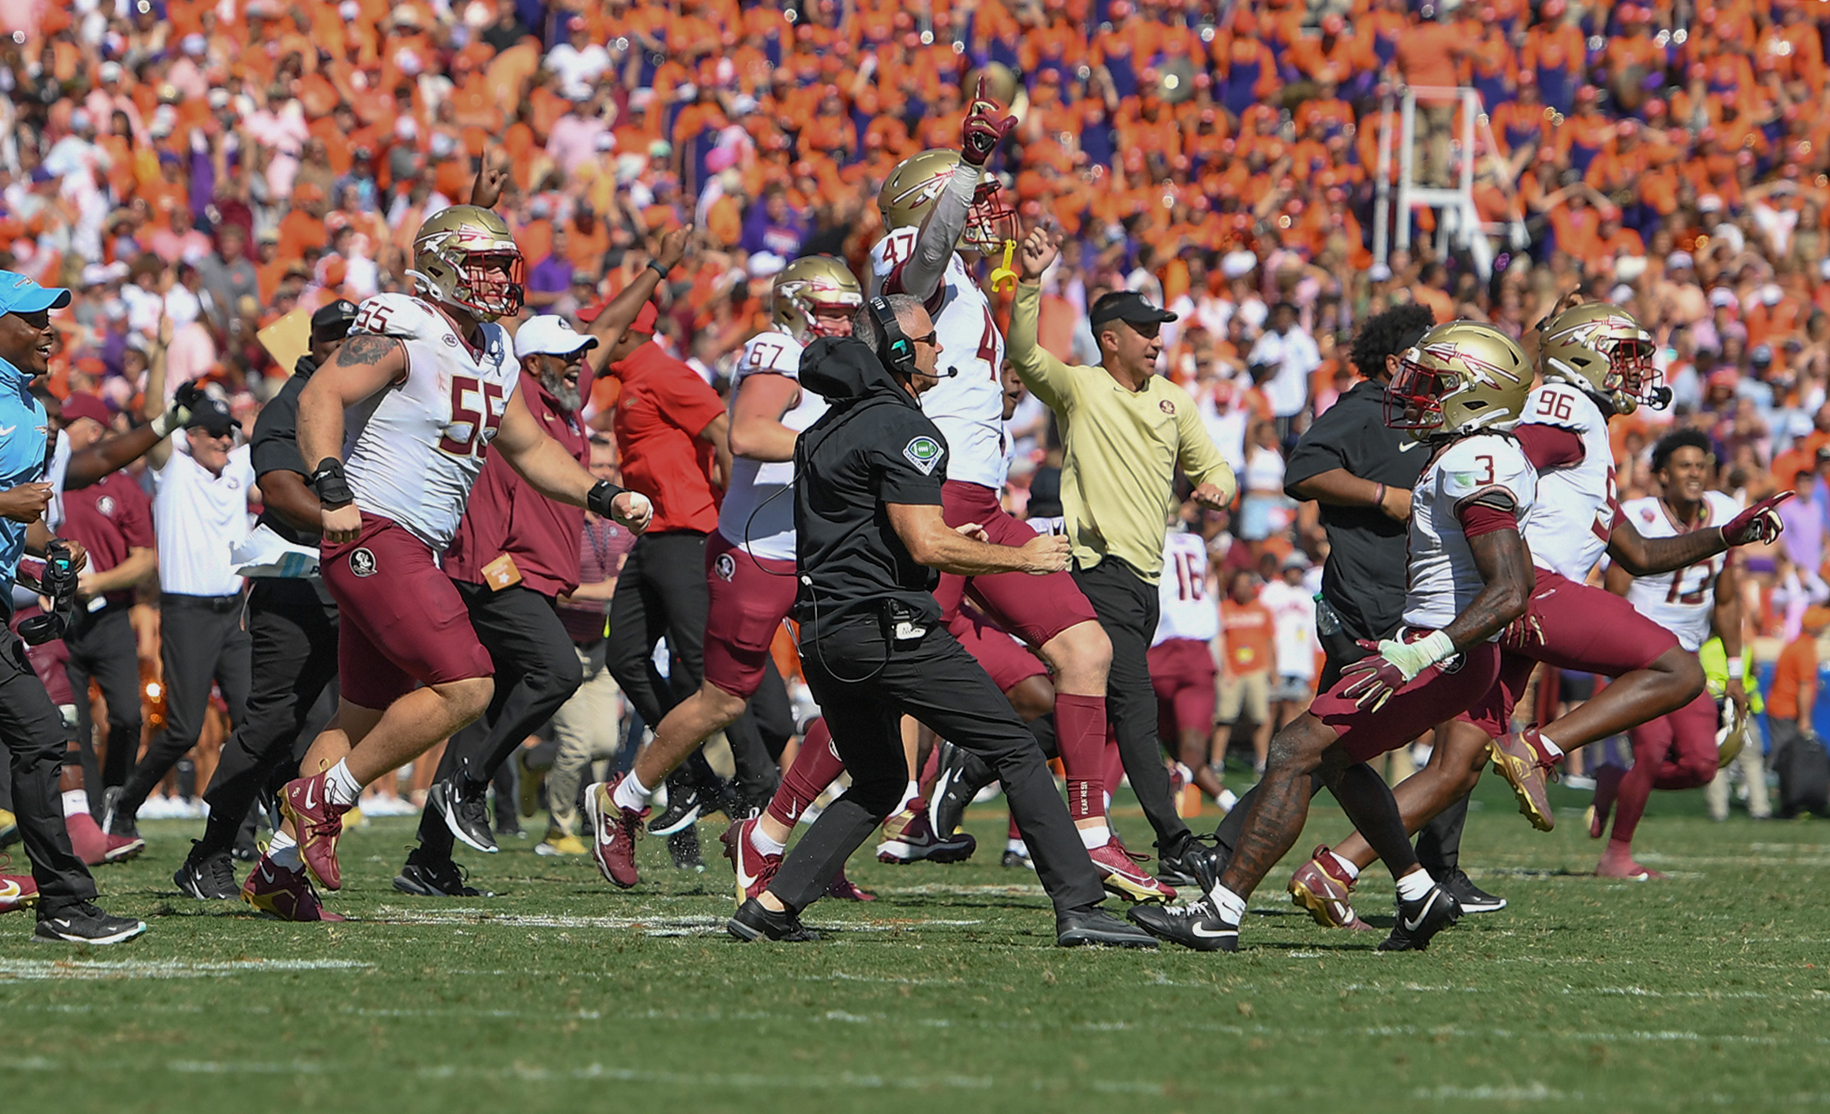 Winning at Clemson puts Florida State in position for a legitimate championship shot